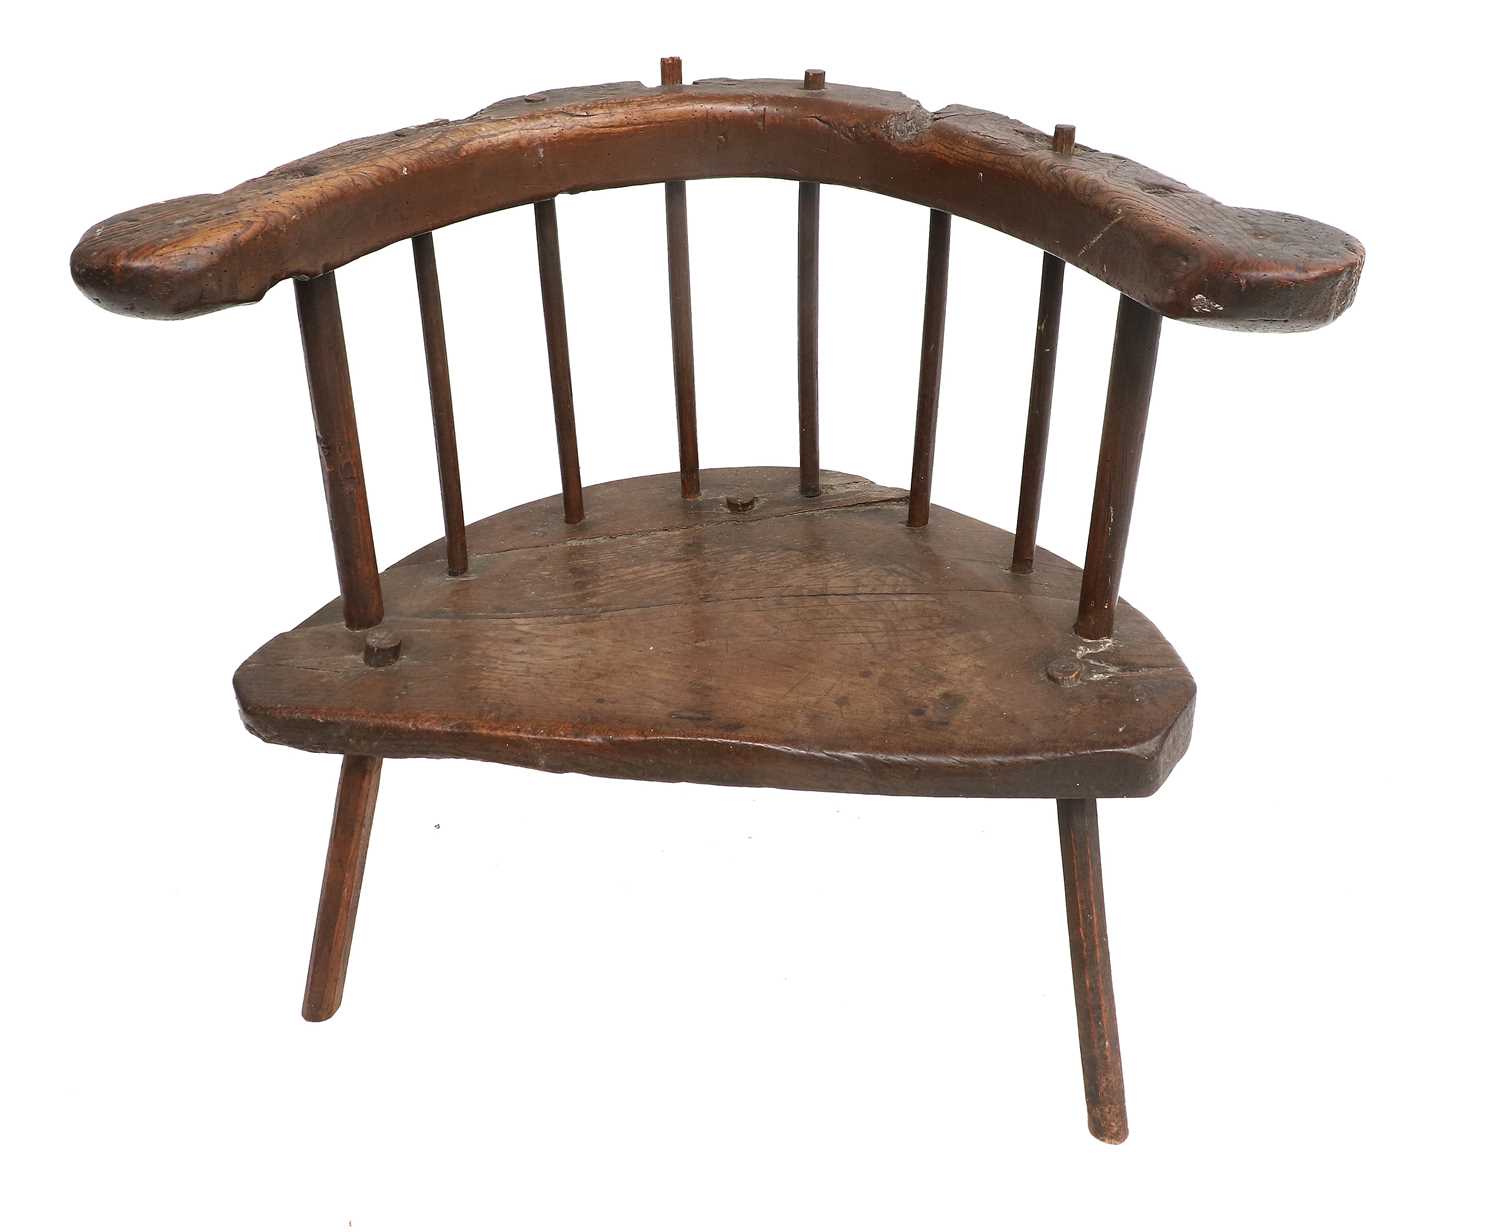 A Primitive Oak Stick-Back Armchair, probably West Country, late 18th/early 19th century, the curved